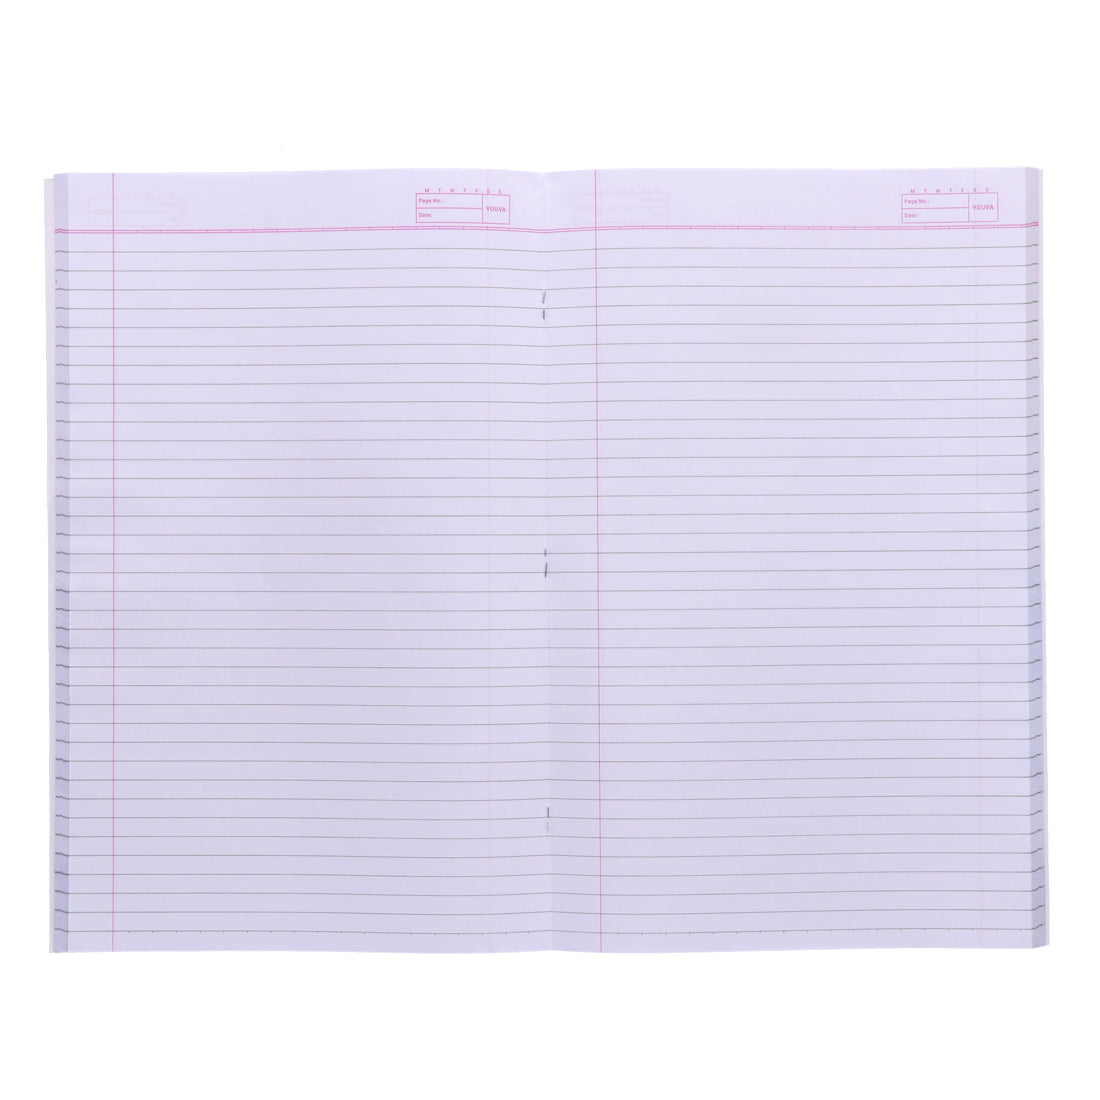 Navneet Youva | Soft Bound Long Book for Students and Office Executives | Foolscap Size 21 cm x 33 cm | Single Line | 228 Pages